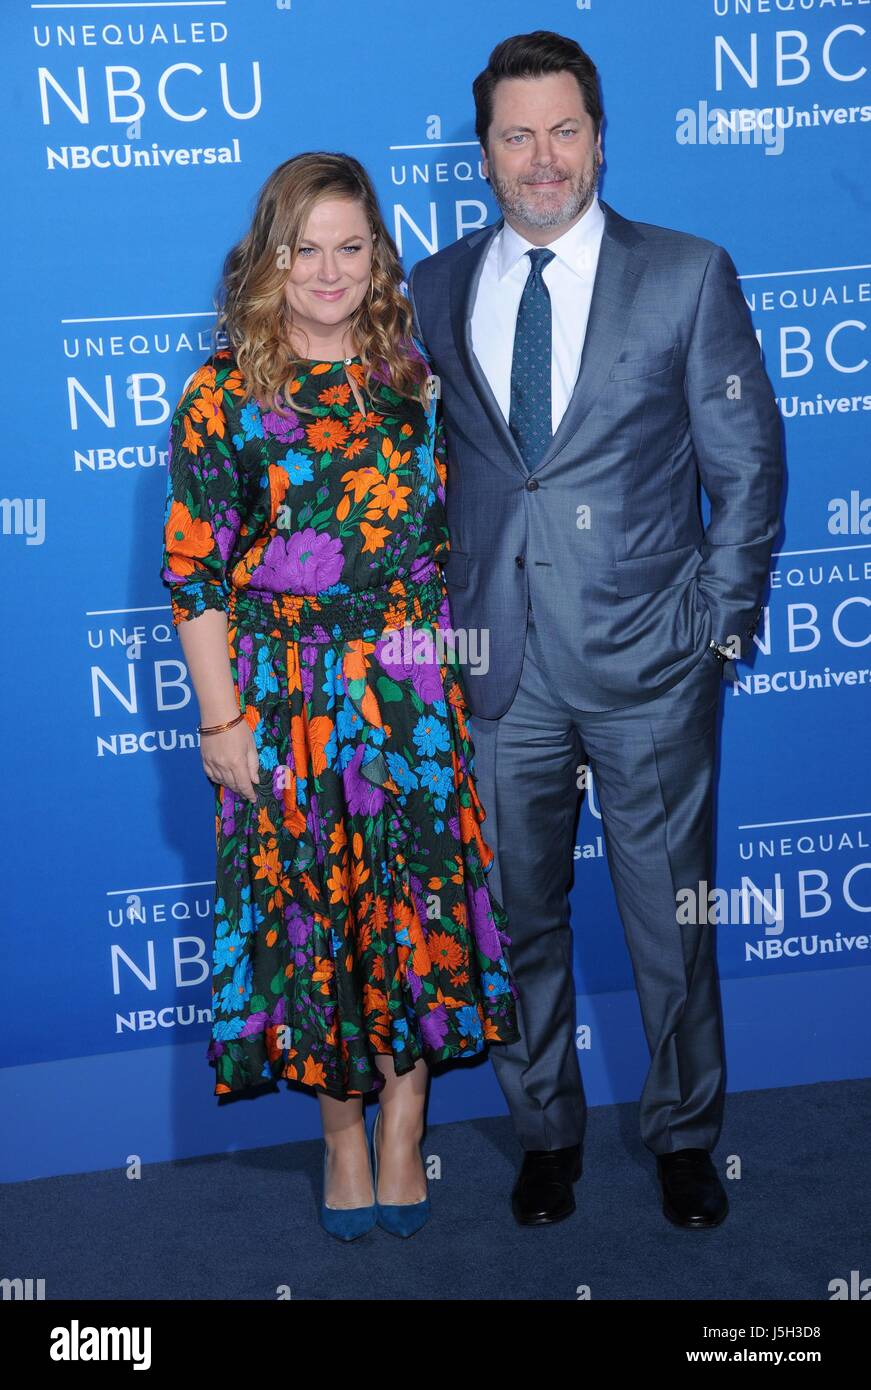 Amy Poehler, Nick Offerman at arrivals for 2017 NBCUniversal Upfront Presentation, Radio City Music Hall, New York, NY May 15, 2017. Photo By: Kristin Callahan/Everett Collection Stock Photo